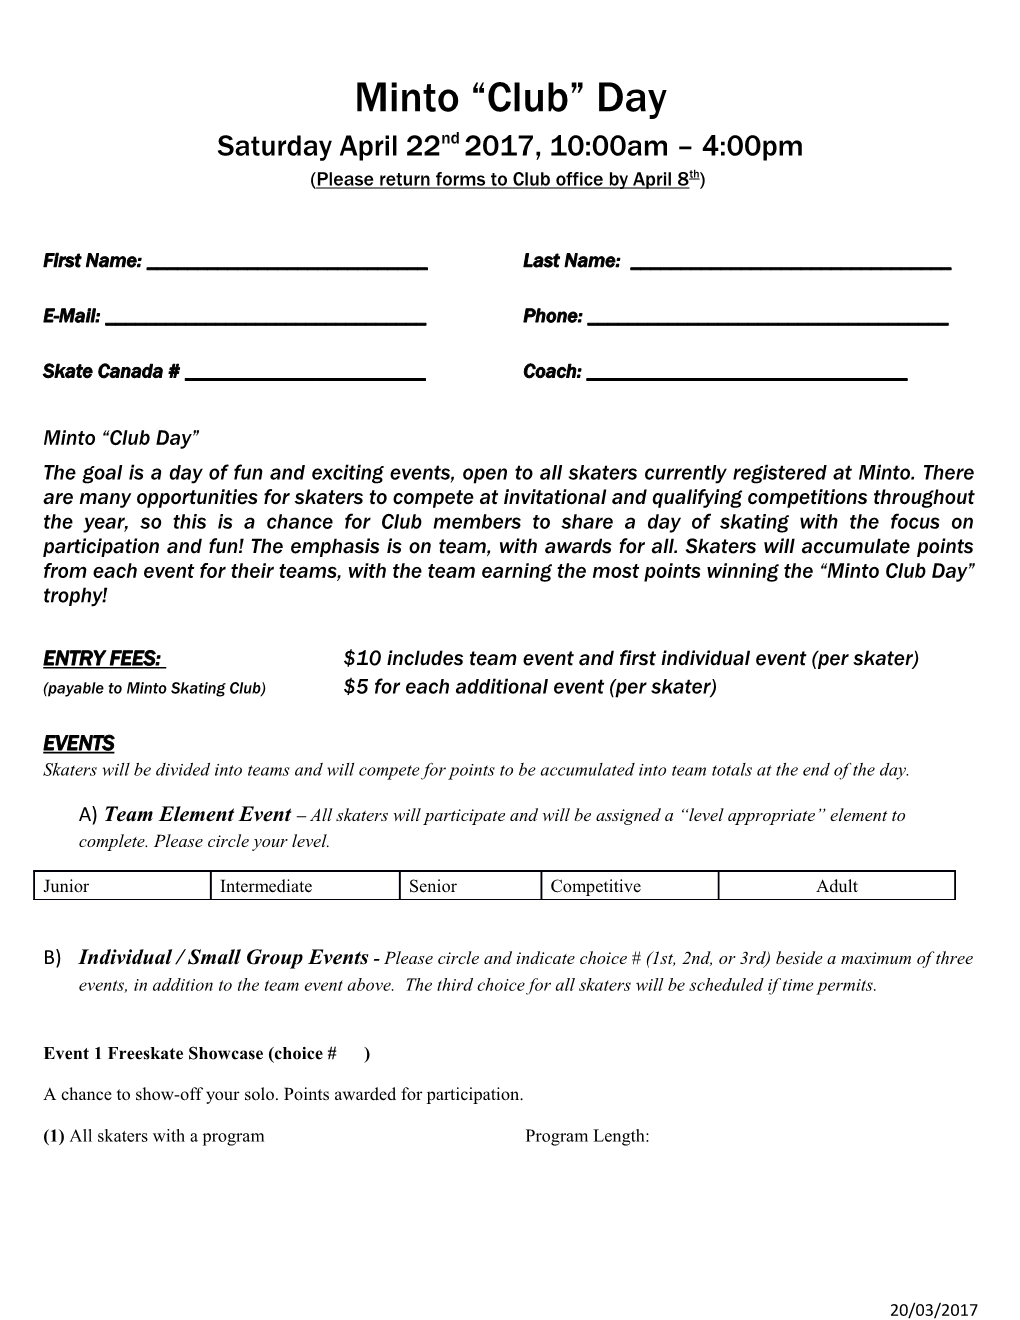 Please Returnforms to Club Office by April 8Th